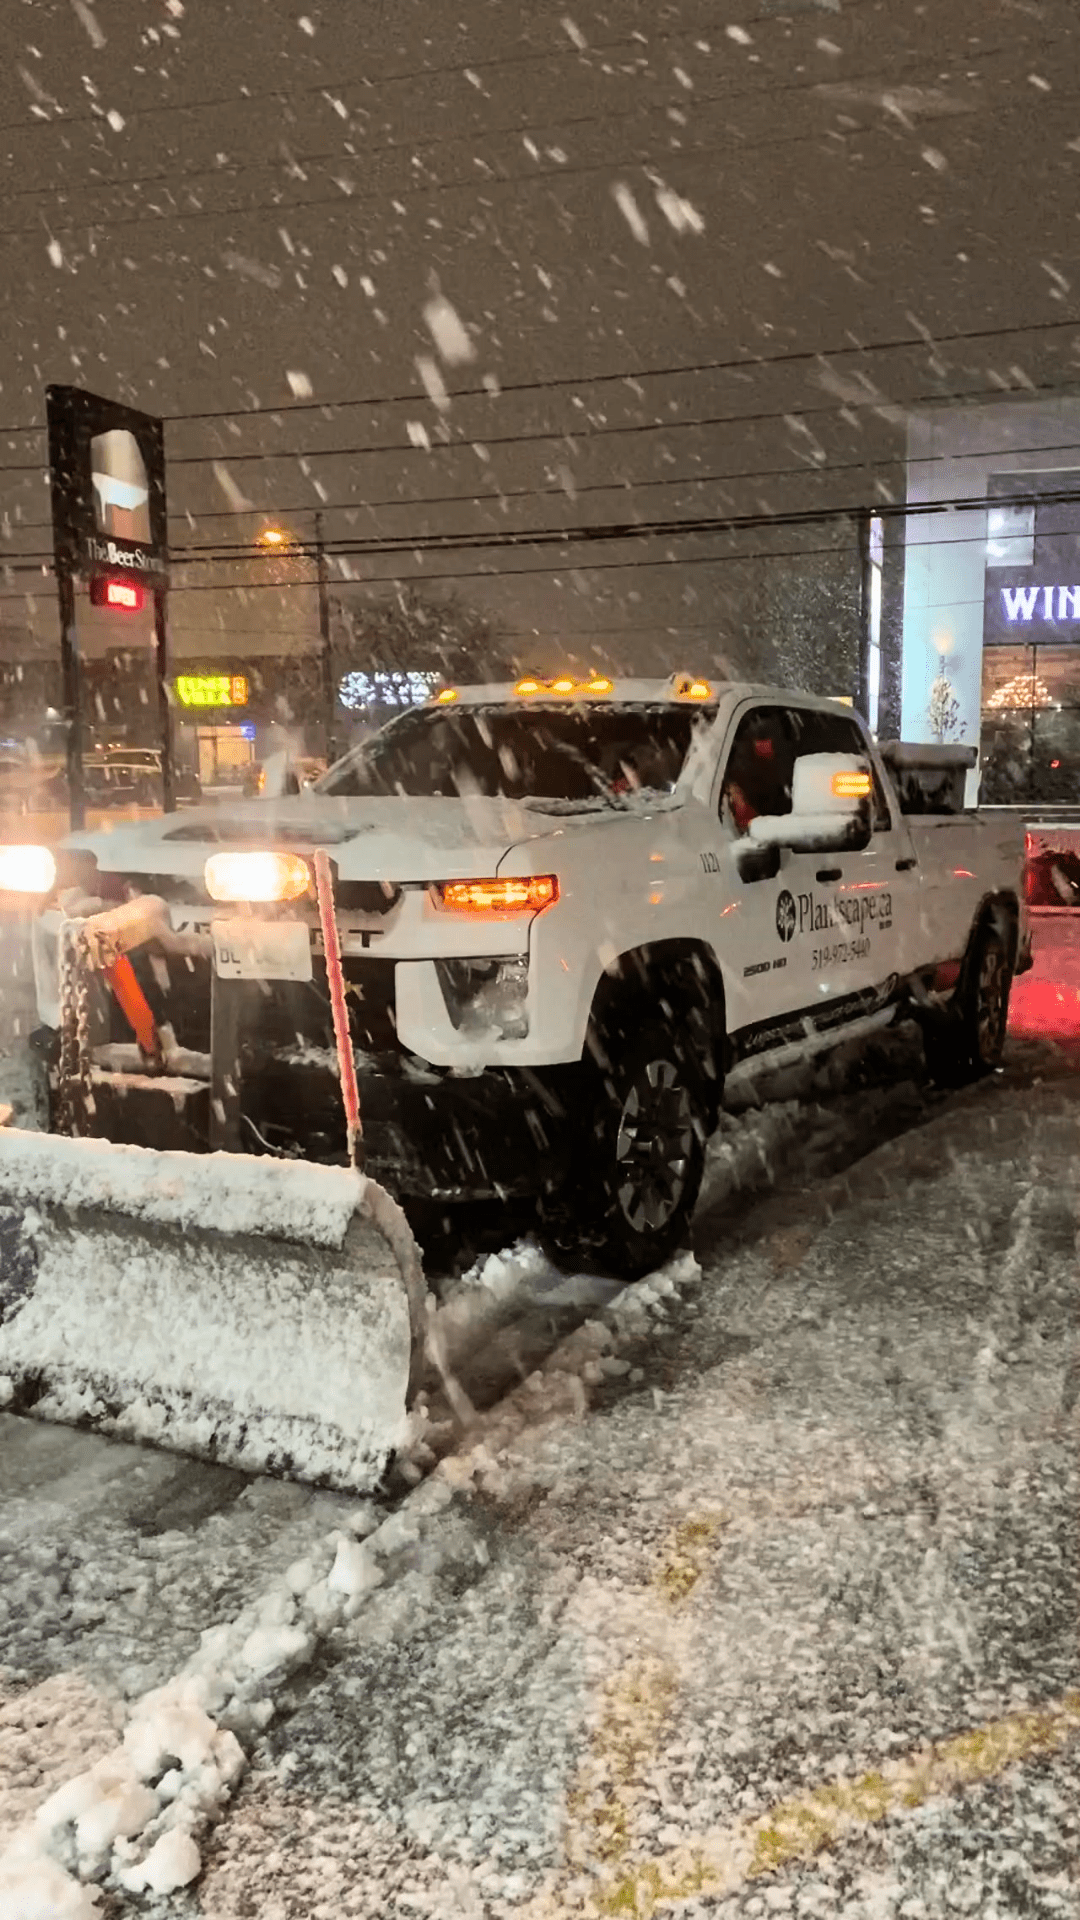 A white pickup truck with company branding is plowing through heavy snow at night, clearing a path near commercial buildings. Snowflakes are visible in the air.